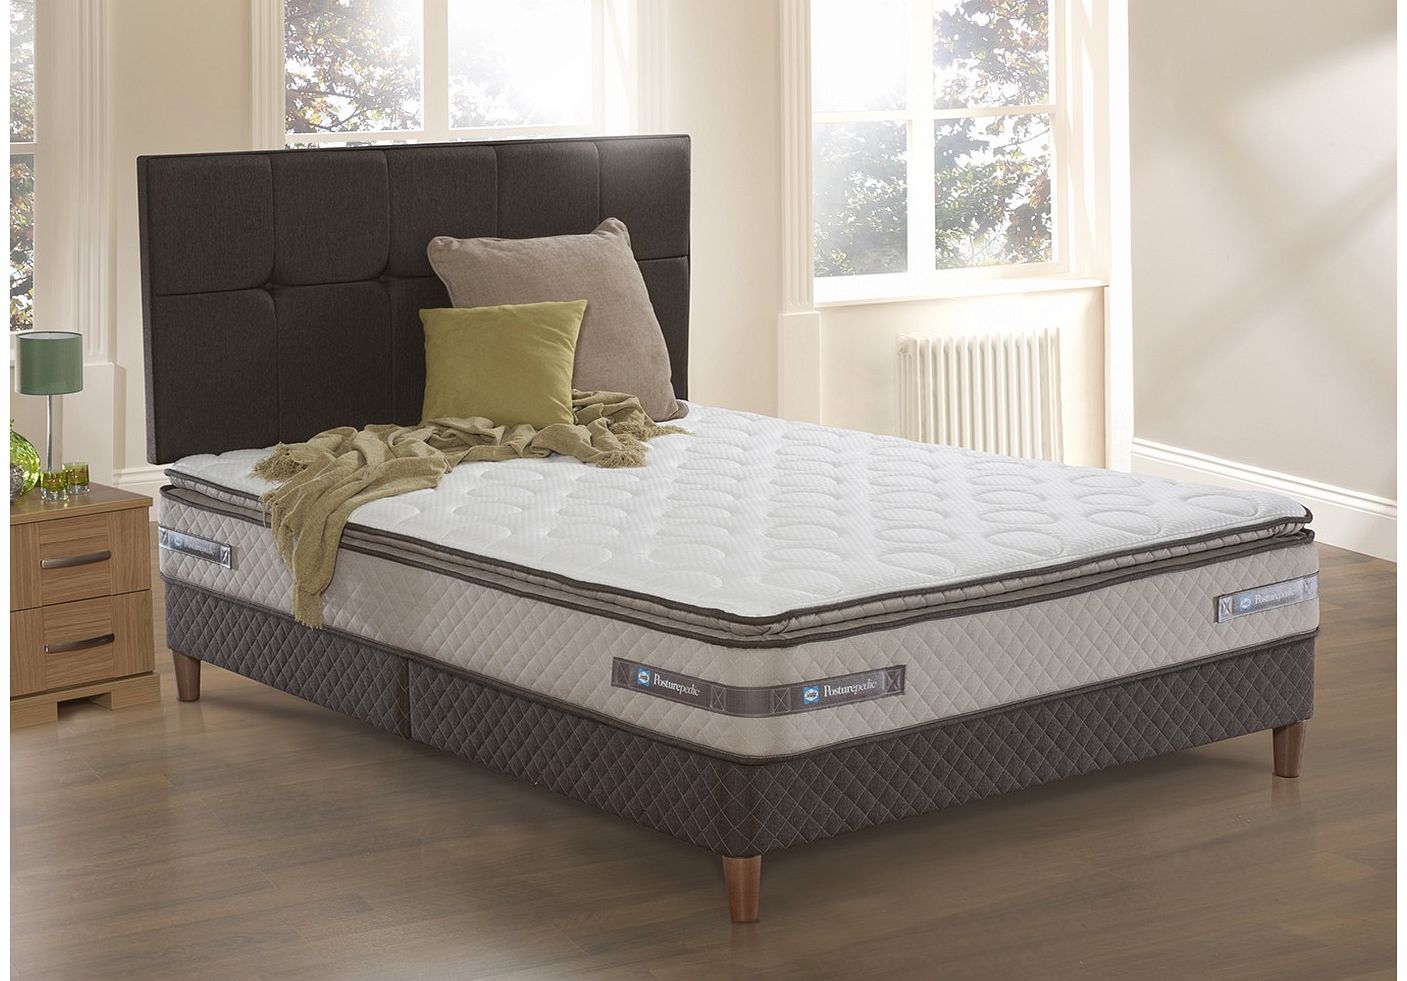 5`0 King Sealy Columbus Posturetech Spring Divan Bed with